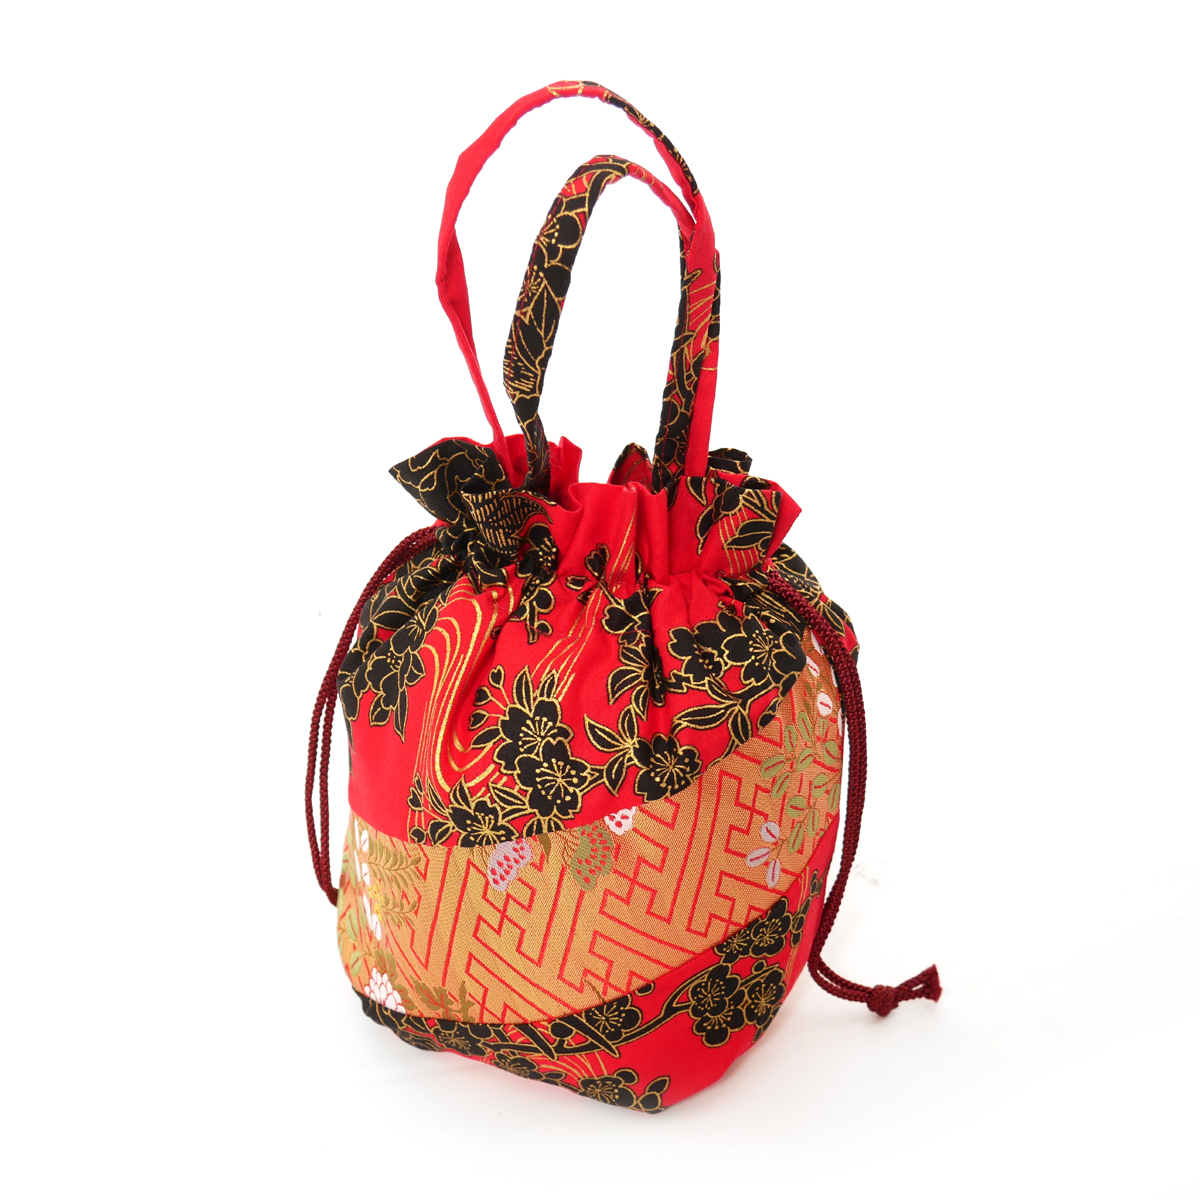 Japanese traditional red kimono bag in polyester various random patterns